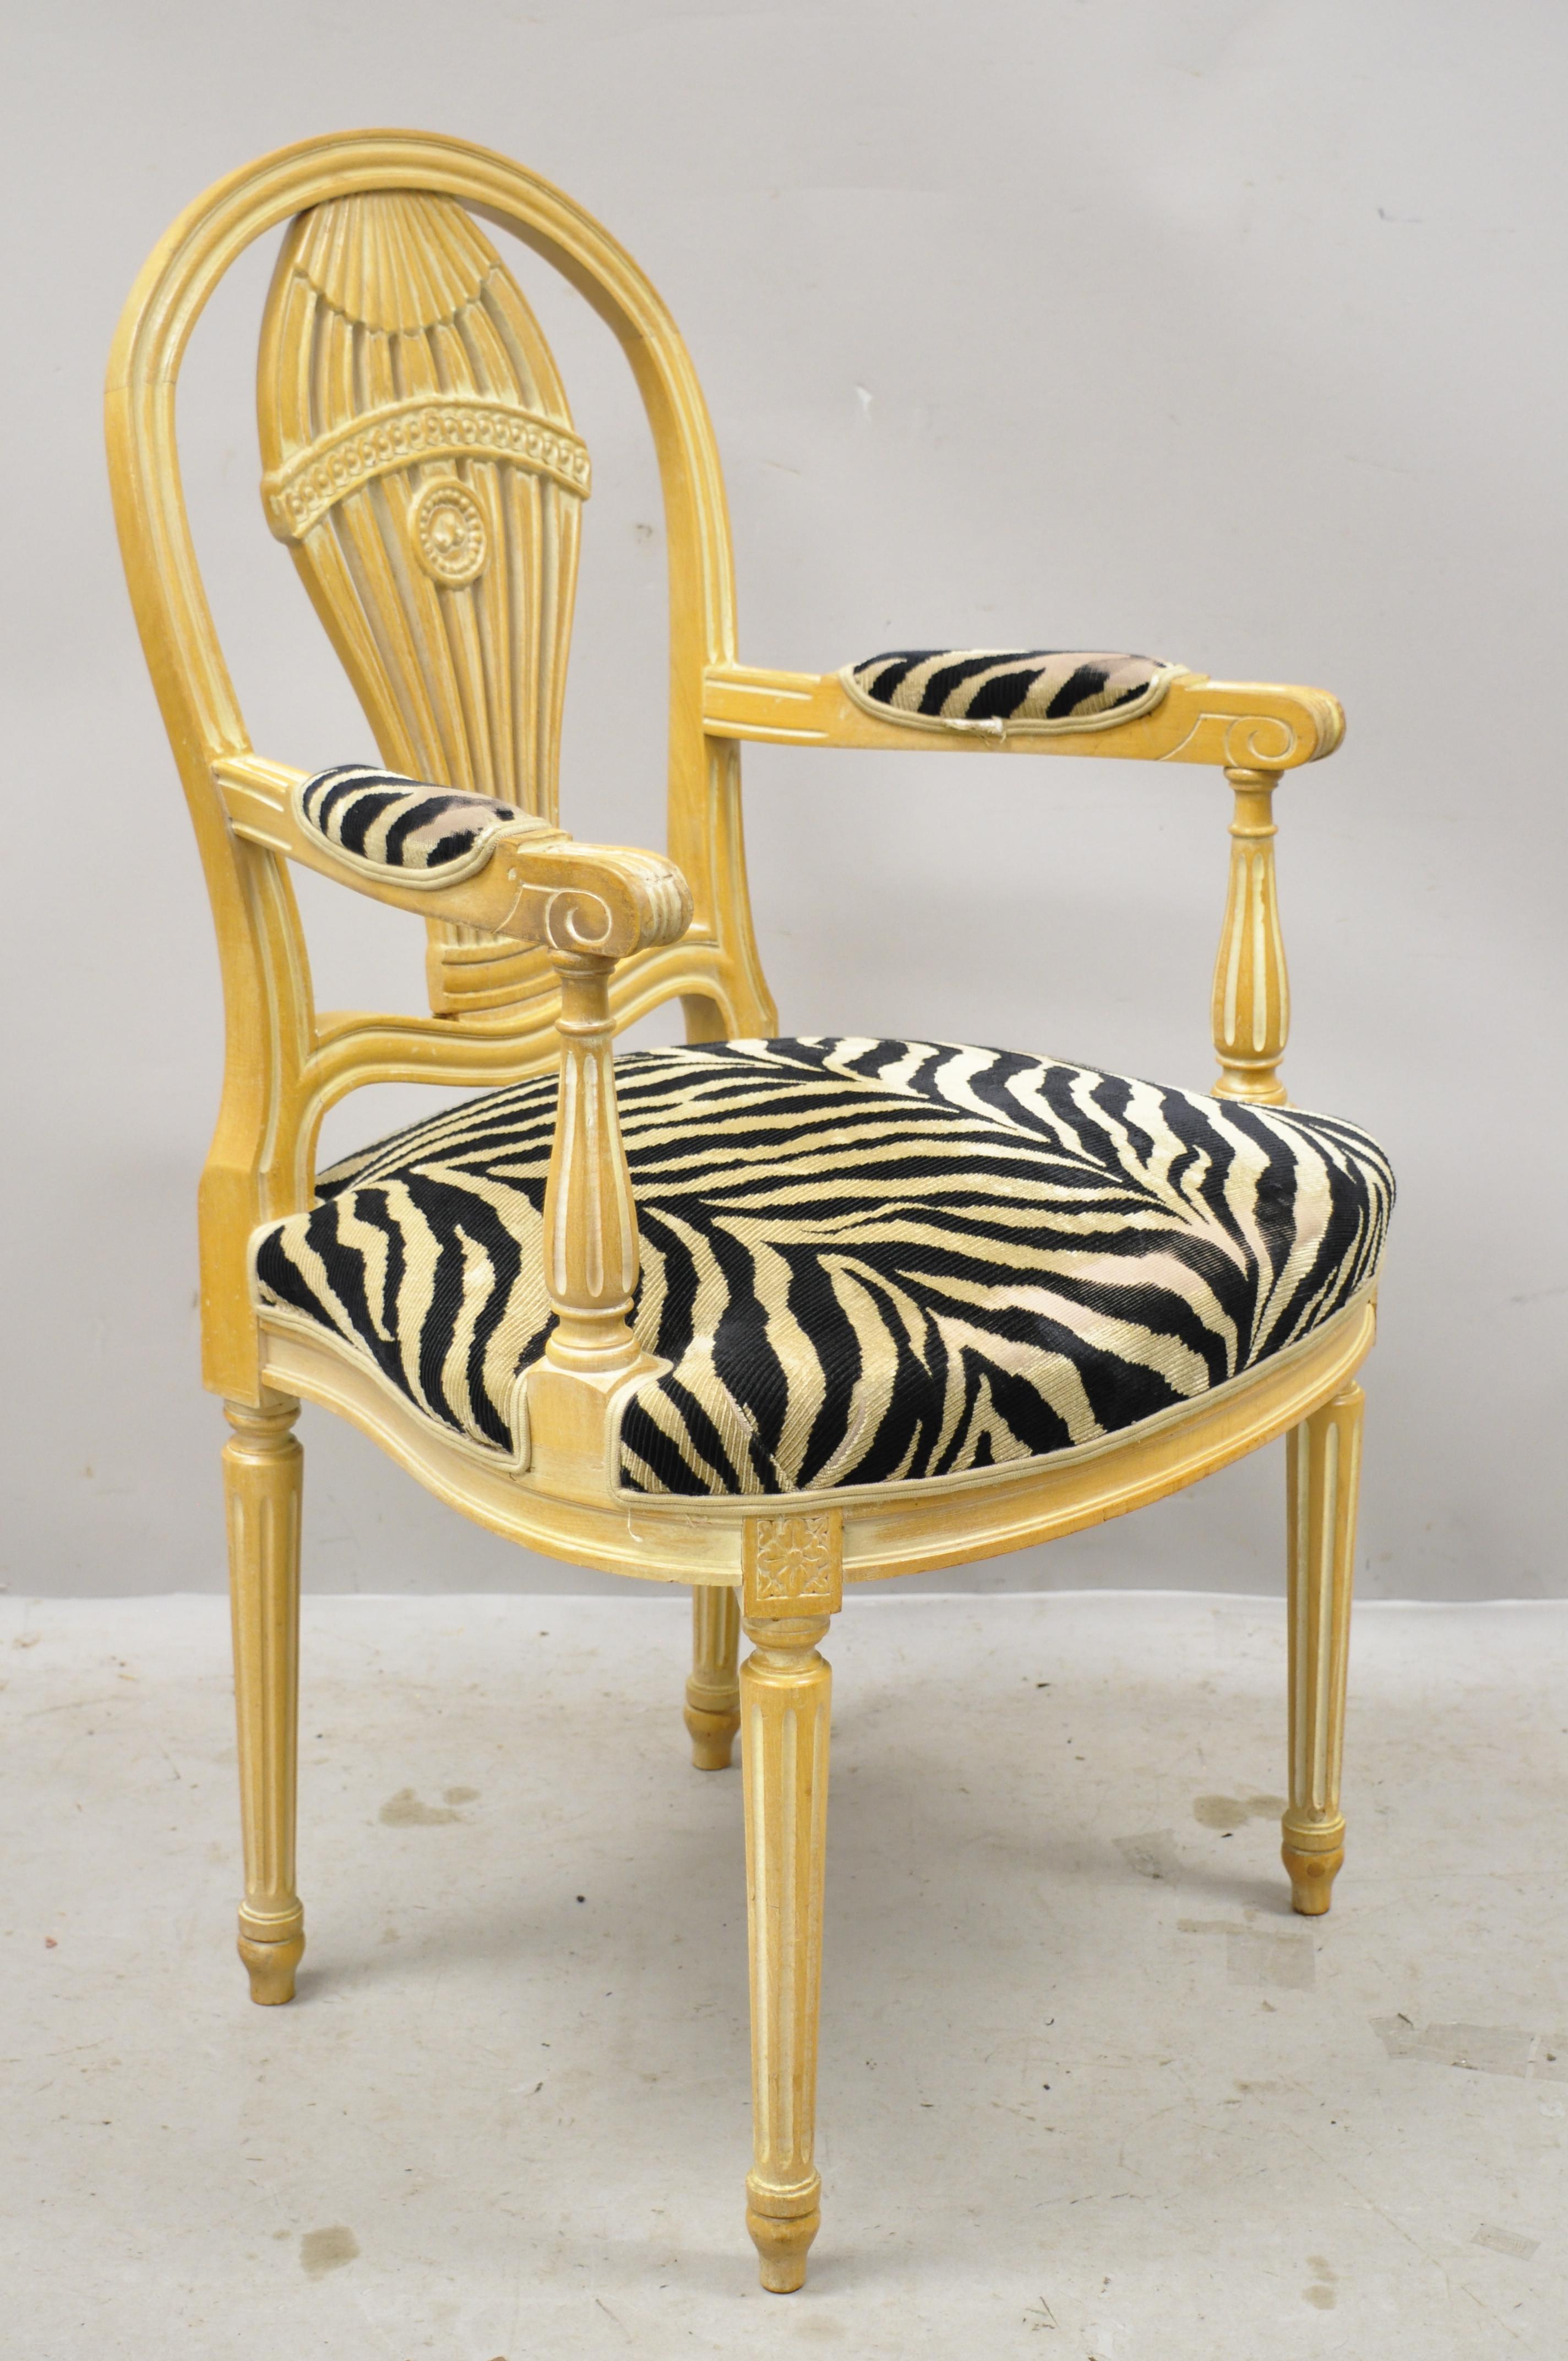 French Louis XVI hot air balloon back Montgolfier zebra print fauteuil armchair. Item features upholstered armrests, nicely carved details, tapered legs, very nice vintage item, great style and form, circa mid-20th century. Measurements: 38.5